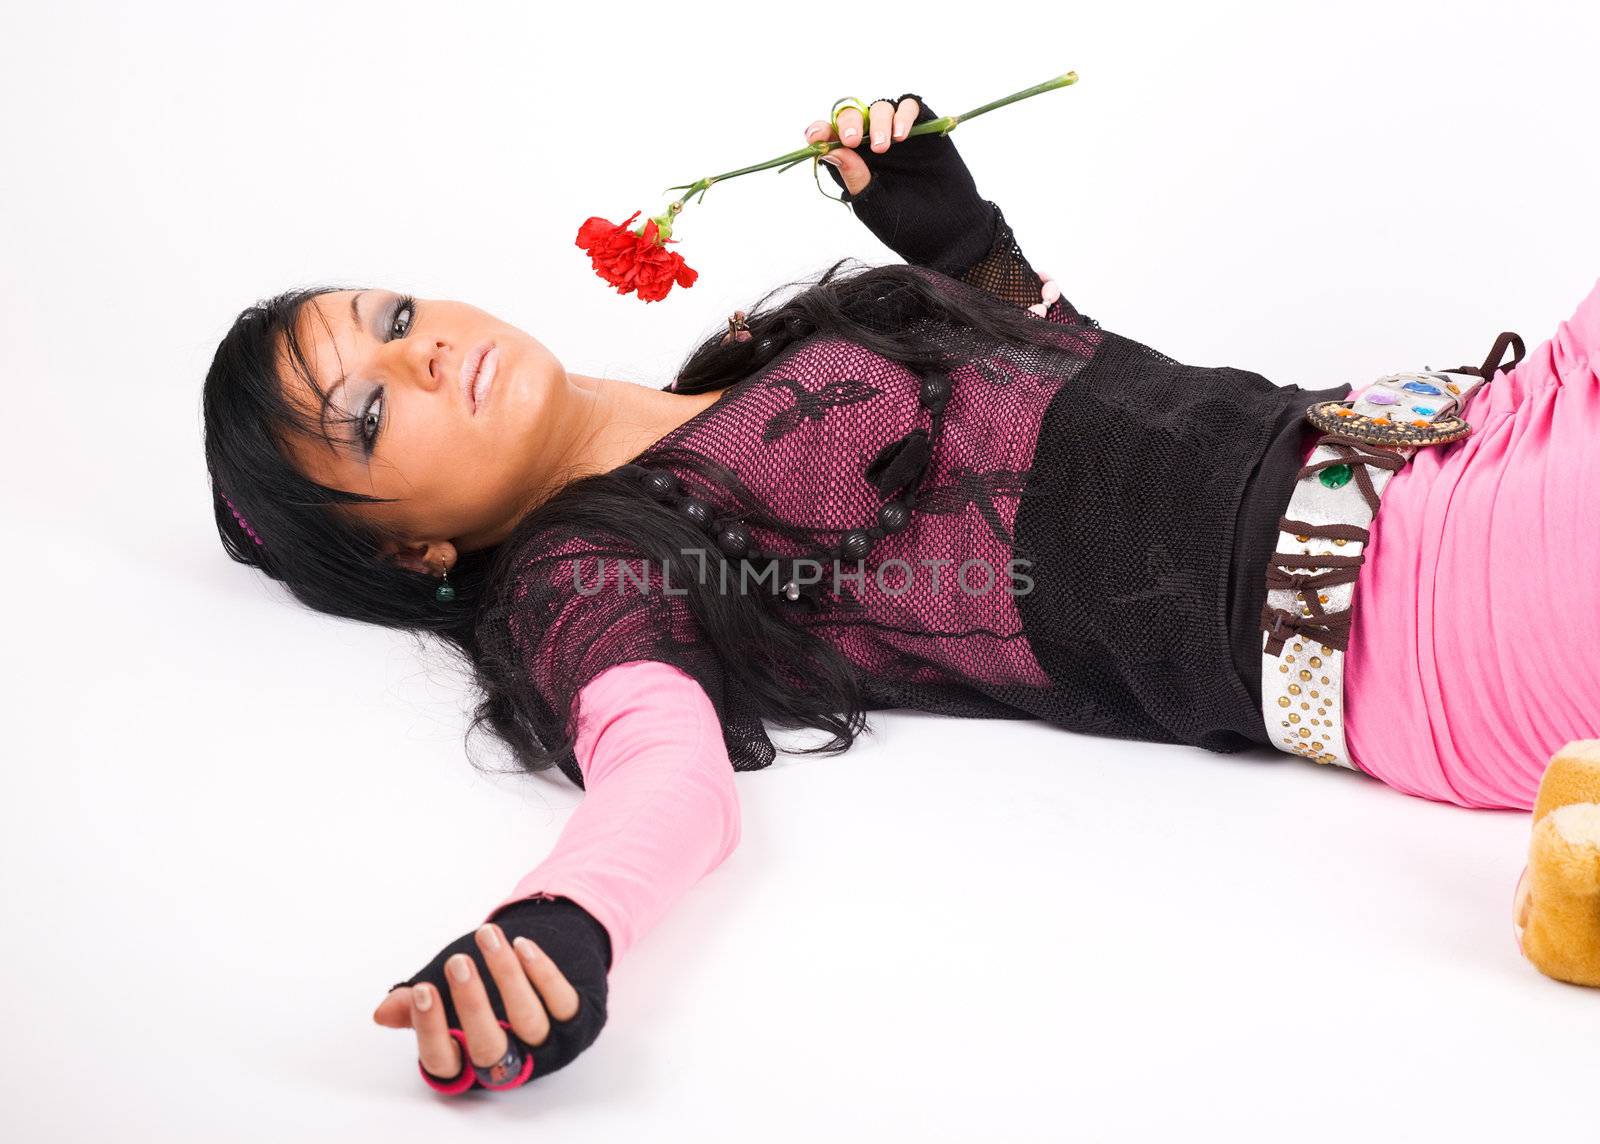 EMO girl posing with red flower